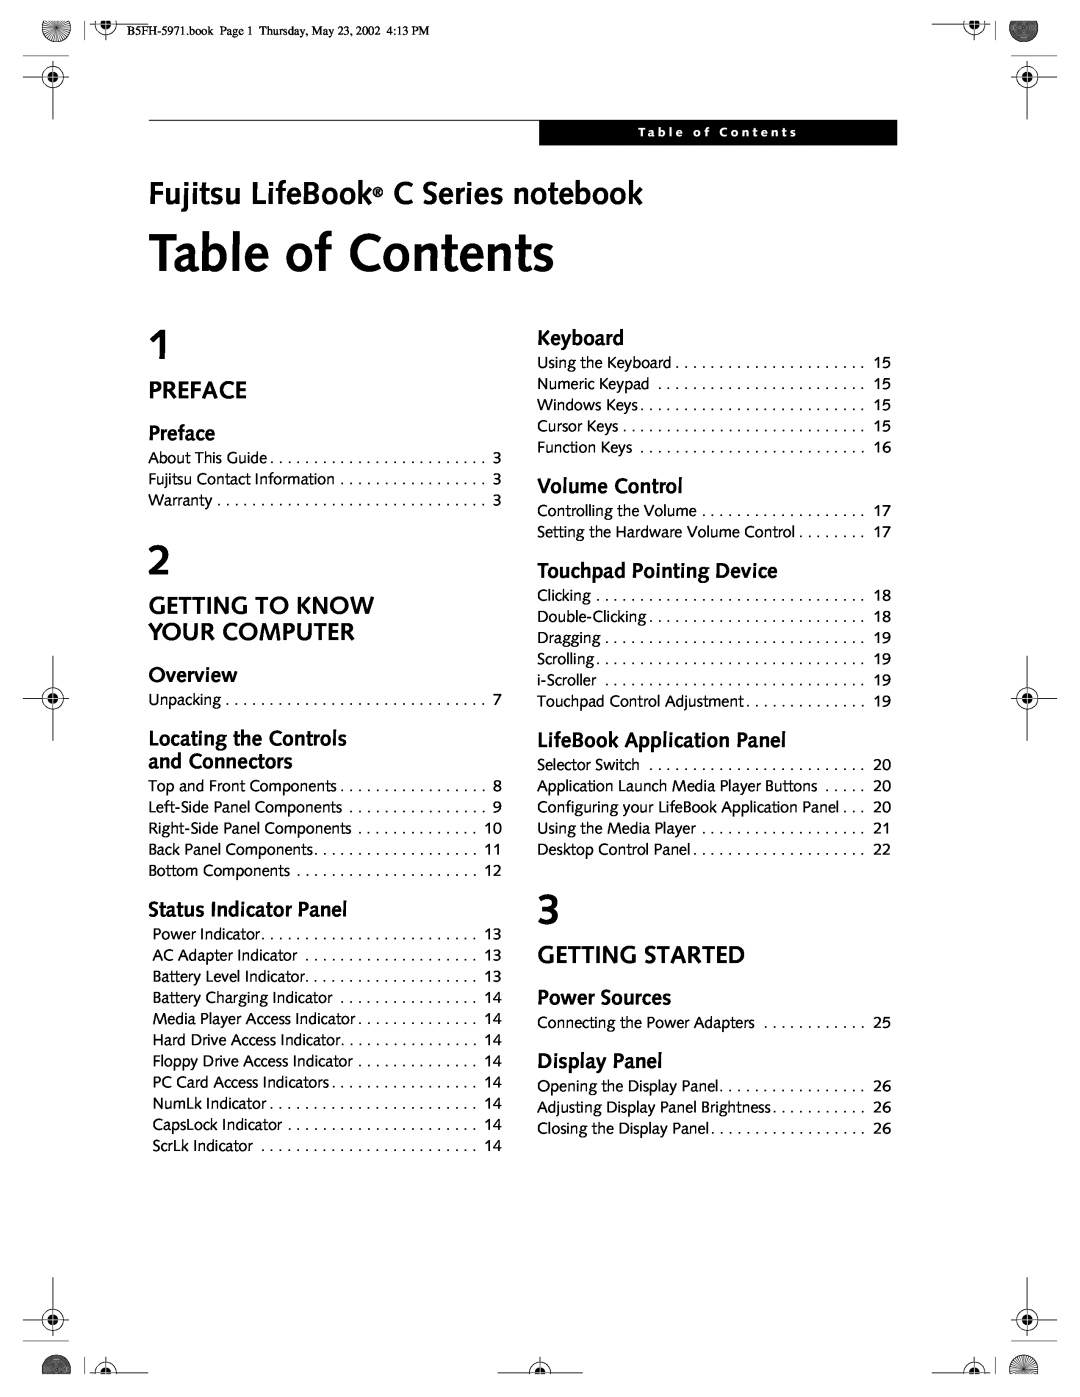 Fujitsu C2010, C2111 manual Table of Contents, Fujitsu LifeBook C Series notebook, Preface, Getting To Know Your Computer 